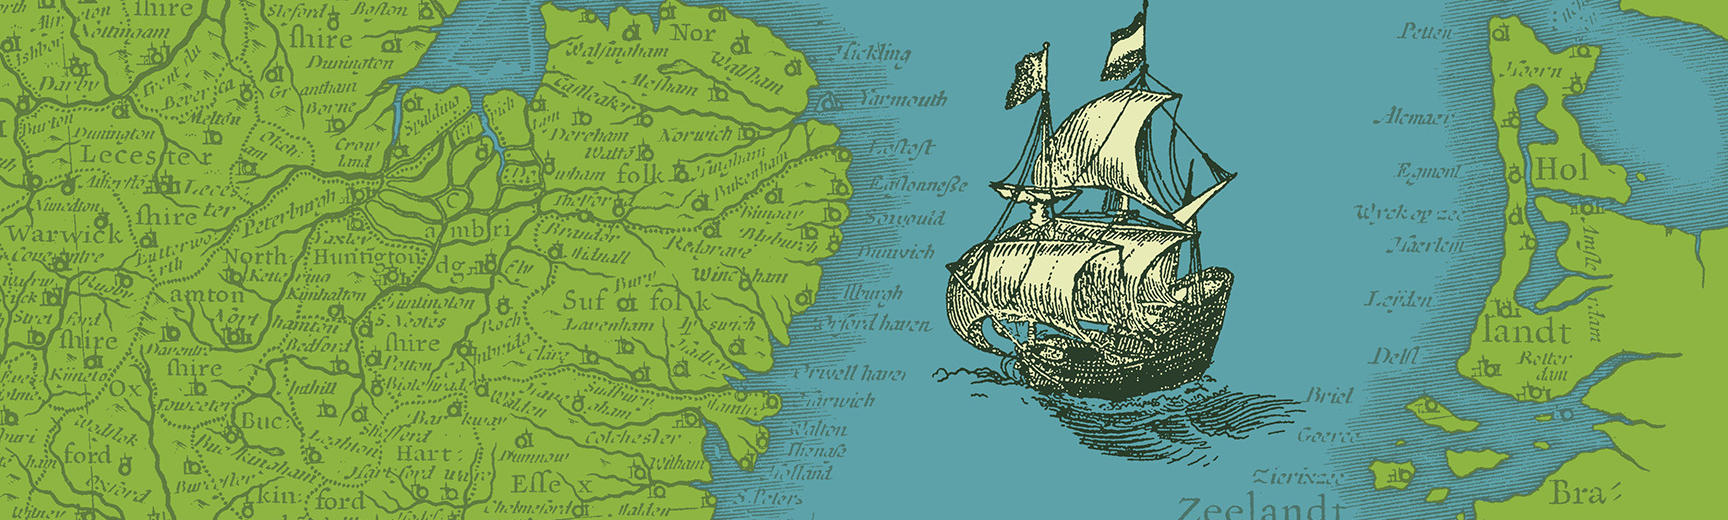 An illustration of a ship sailing from the Netherlands to England